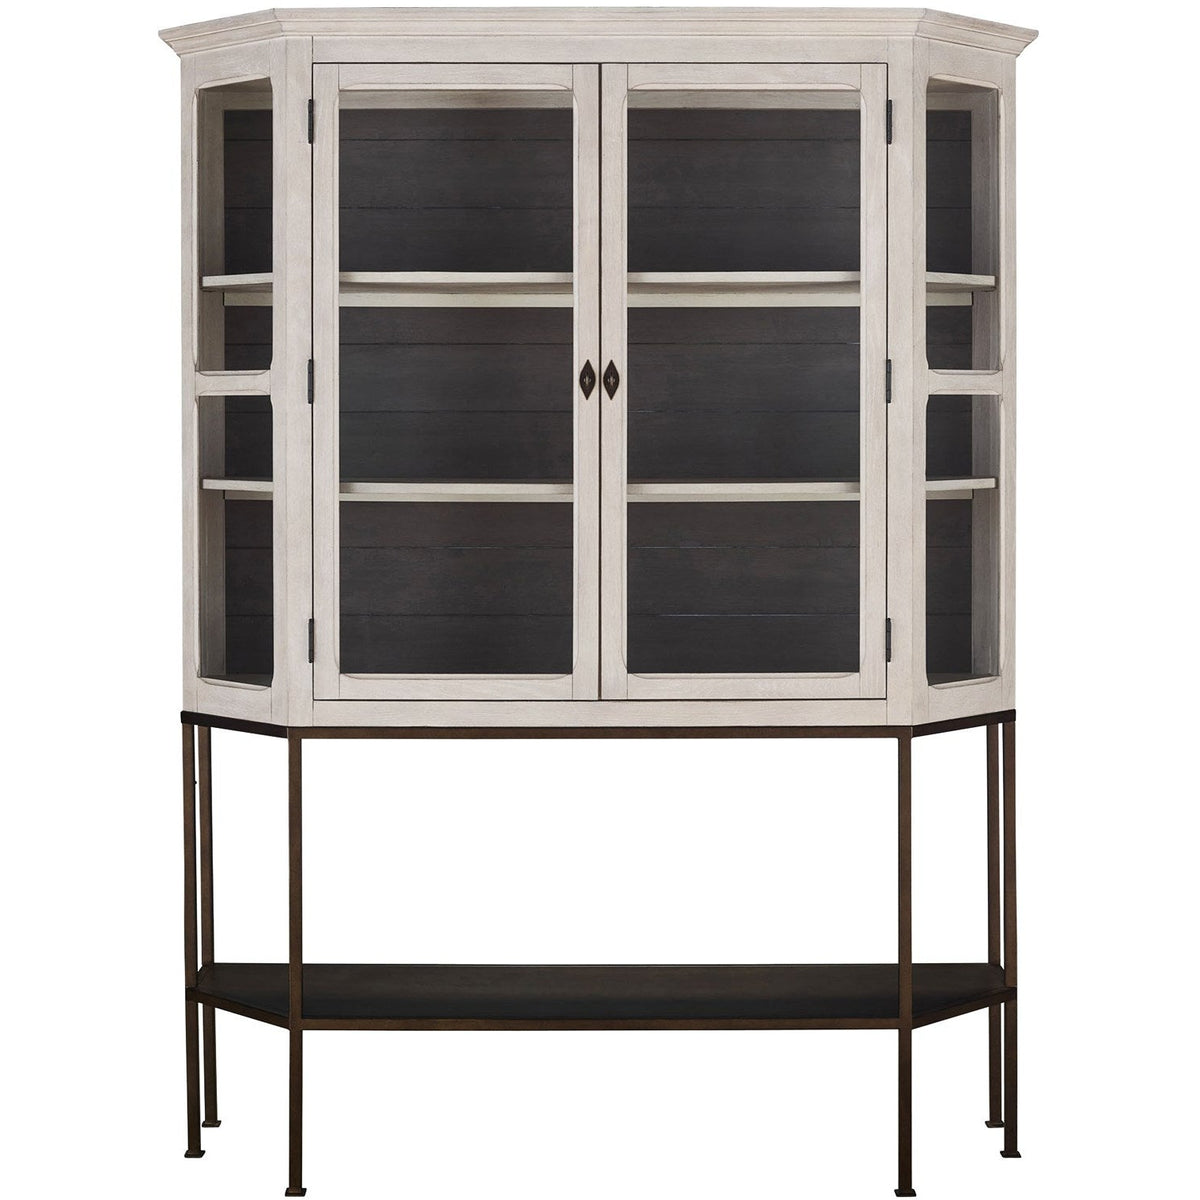 Lawrence Display Cabinet - Be Bold Furniture